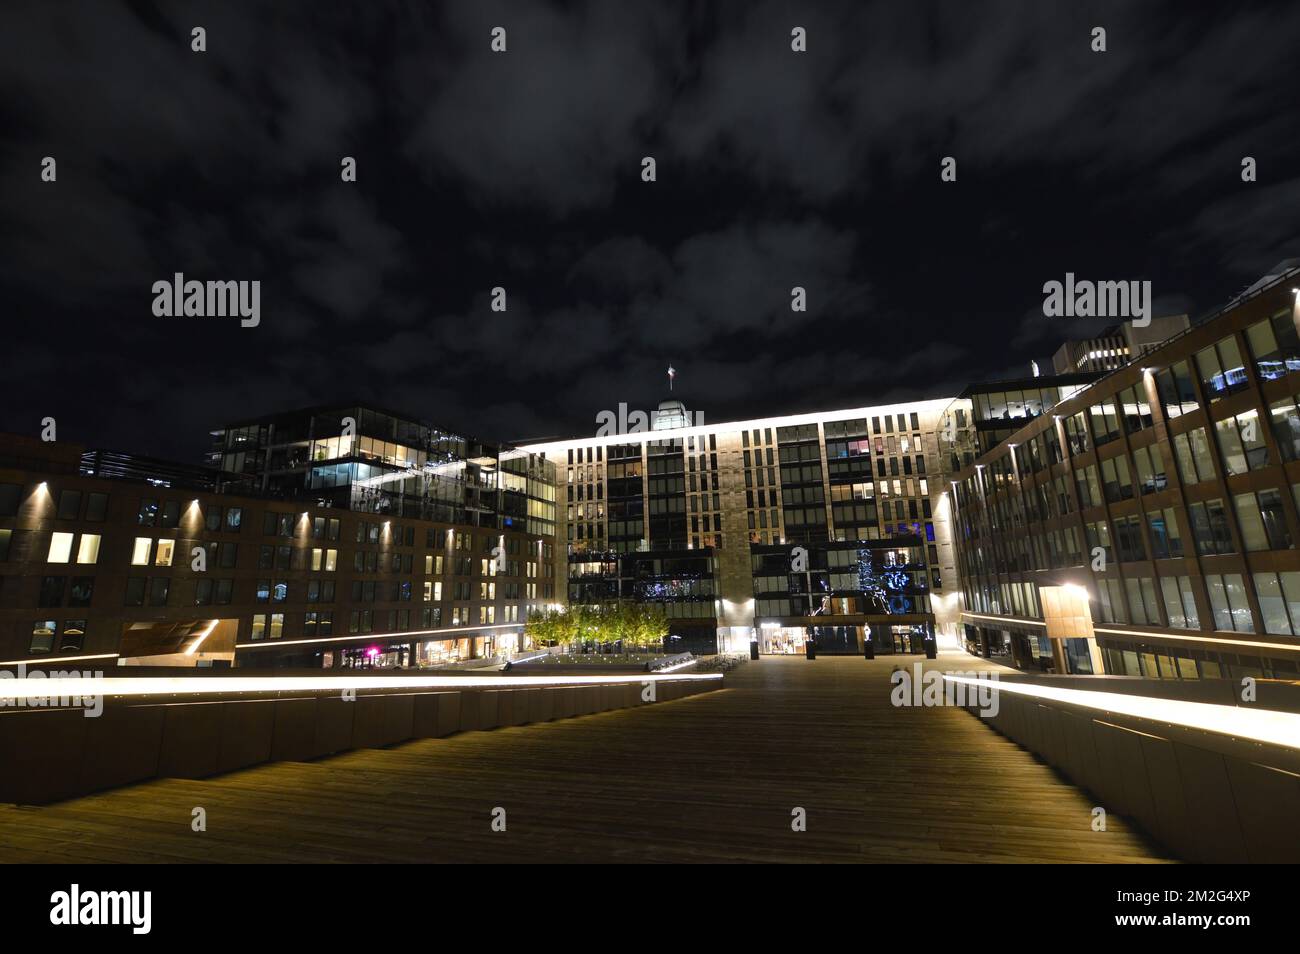 Queen's Marque waterfront development in downtown Halifax, Nova Scotia, Canada at night. Stock Photo